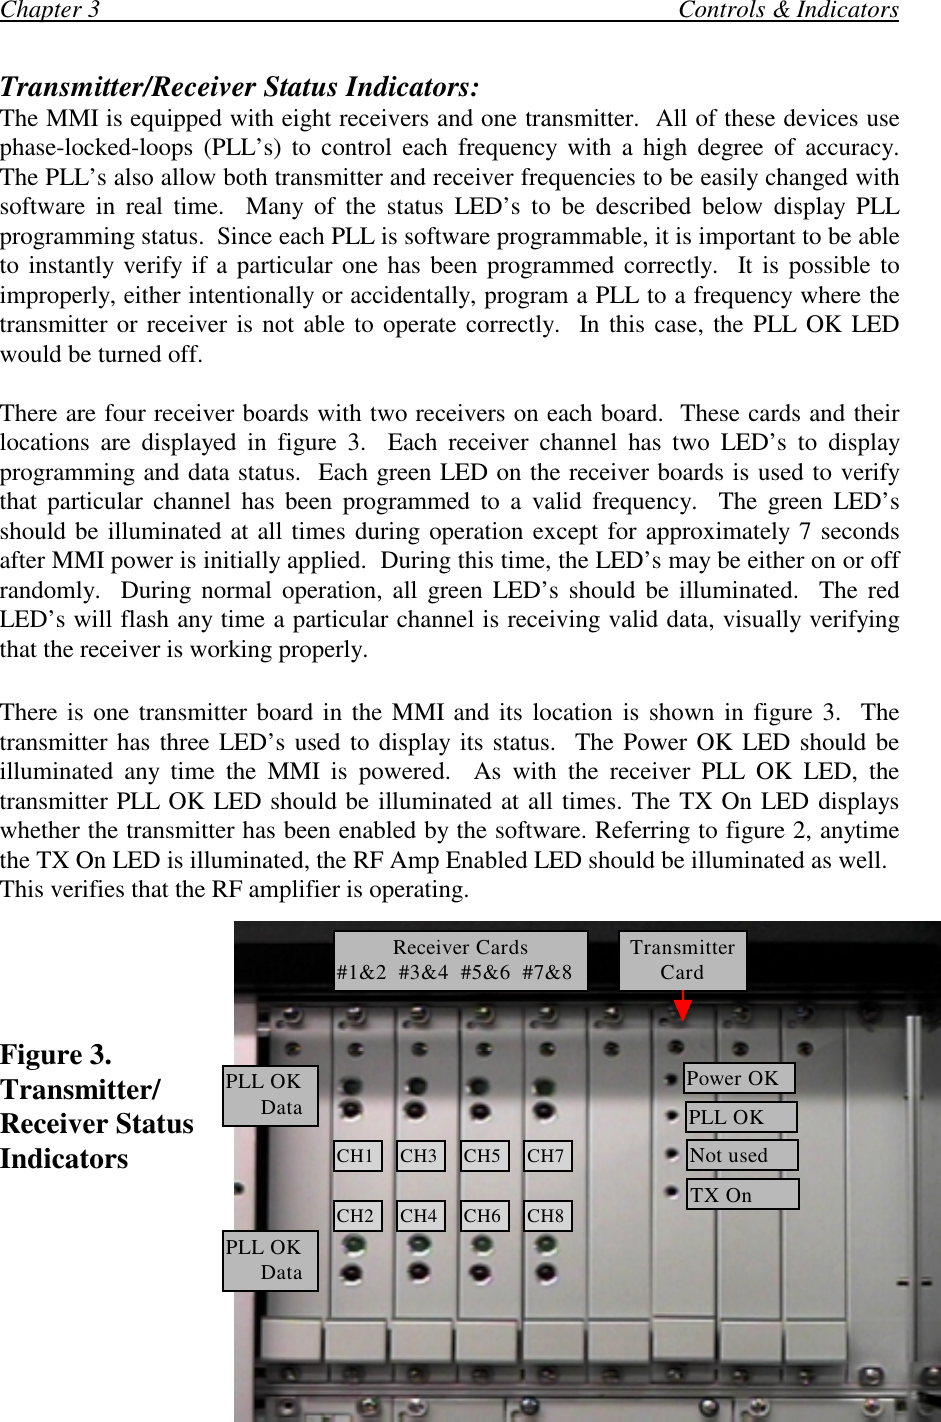 Chapter 3                                                                                             Controls &amp; IndicatorsTransmitter/Receiver Status Indicators:The MMI is equipped with eight receivers and one transmitter.  All of these devices usephase-locked-loops (PLL’s) to control each frequency with a high degree of accuracy.The PLL’s also allow both transmitter and receiver frequencies to be easily changed withsoftware in real time.  Many of the status LED’s to be described below display PLLprogramming status.  Since each PLL is software programmable, it is important to be ableto instantly verify if a particular one has been programmed correctly.  It is possible toimproperly, either intentionally or accidentally, program a PLL to a frequency where thetransmitter or receiver is not able to operate correctly.  In this case, the PLL OK LEDwould be turned off.There are four receiver boards with two receivers on each board.  These cards and theirlocations are displayed in figure 3.  Each receiver channel has two LED’s to displayprogramming and data status.  Each green LED on the receiver boards is used to verifythat particular channel has been programmed to a valid frequency.  The green LED’sshould be illuminated at all times during operation except for approximately 7 secondsafter MMI power is initially applied.  During this time, the LED’s may be either on or offrandomly.  During normal operation, all green LED’s should be illuminated.  The redLED’s will flash any time a particular channel is receiving valid data, visually verifyingthat the receiver is working properly.There is one transmitter board in the MMI and its location is shown in figure 3.  Thetransmitter has three LED’s used to display its status.  The Power OK LED should beilluminated any time the MMI is powered.  As with the receiver PLL OK LED, thetransmitter PLL OK LED should be illuminated at all times. The TX On LED displayswhether the transmitter has been enabled by the software. Referring to figure 2, anytimethe TX On LED is illuminated, the RF Amp Enabled LED should be illuminated as well.This verifies that the RF amplifier is operating.Figure 3.Transmitter/Receiver StatusIndicatorsReceiver Cards#1&amp;2  #3&amp;4  #5&amp;6  #7&amp;8 TransmitterCardPLL OK      DataPLL OK      DataPower OKPLL OKNot usedTX OnCH1 CH3 CH5 CH7CH2 CH4 CH6 CH8